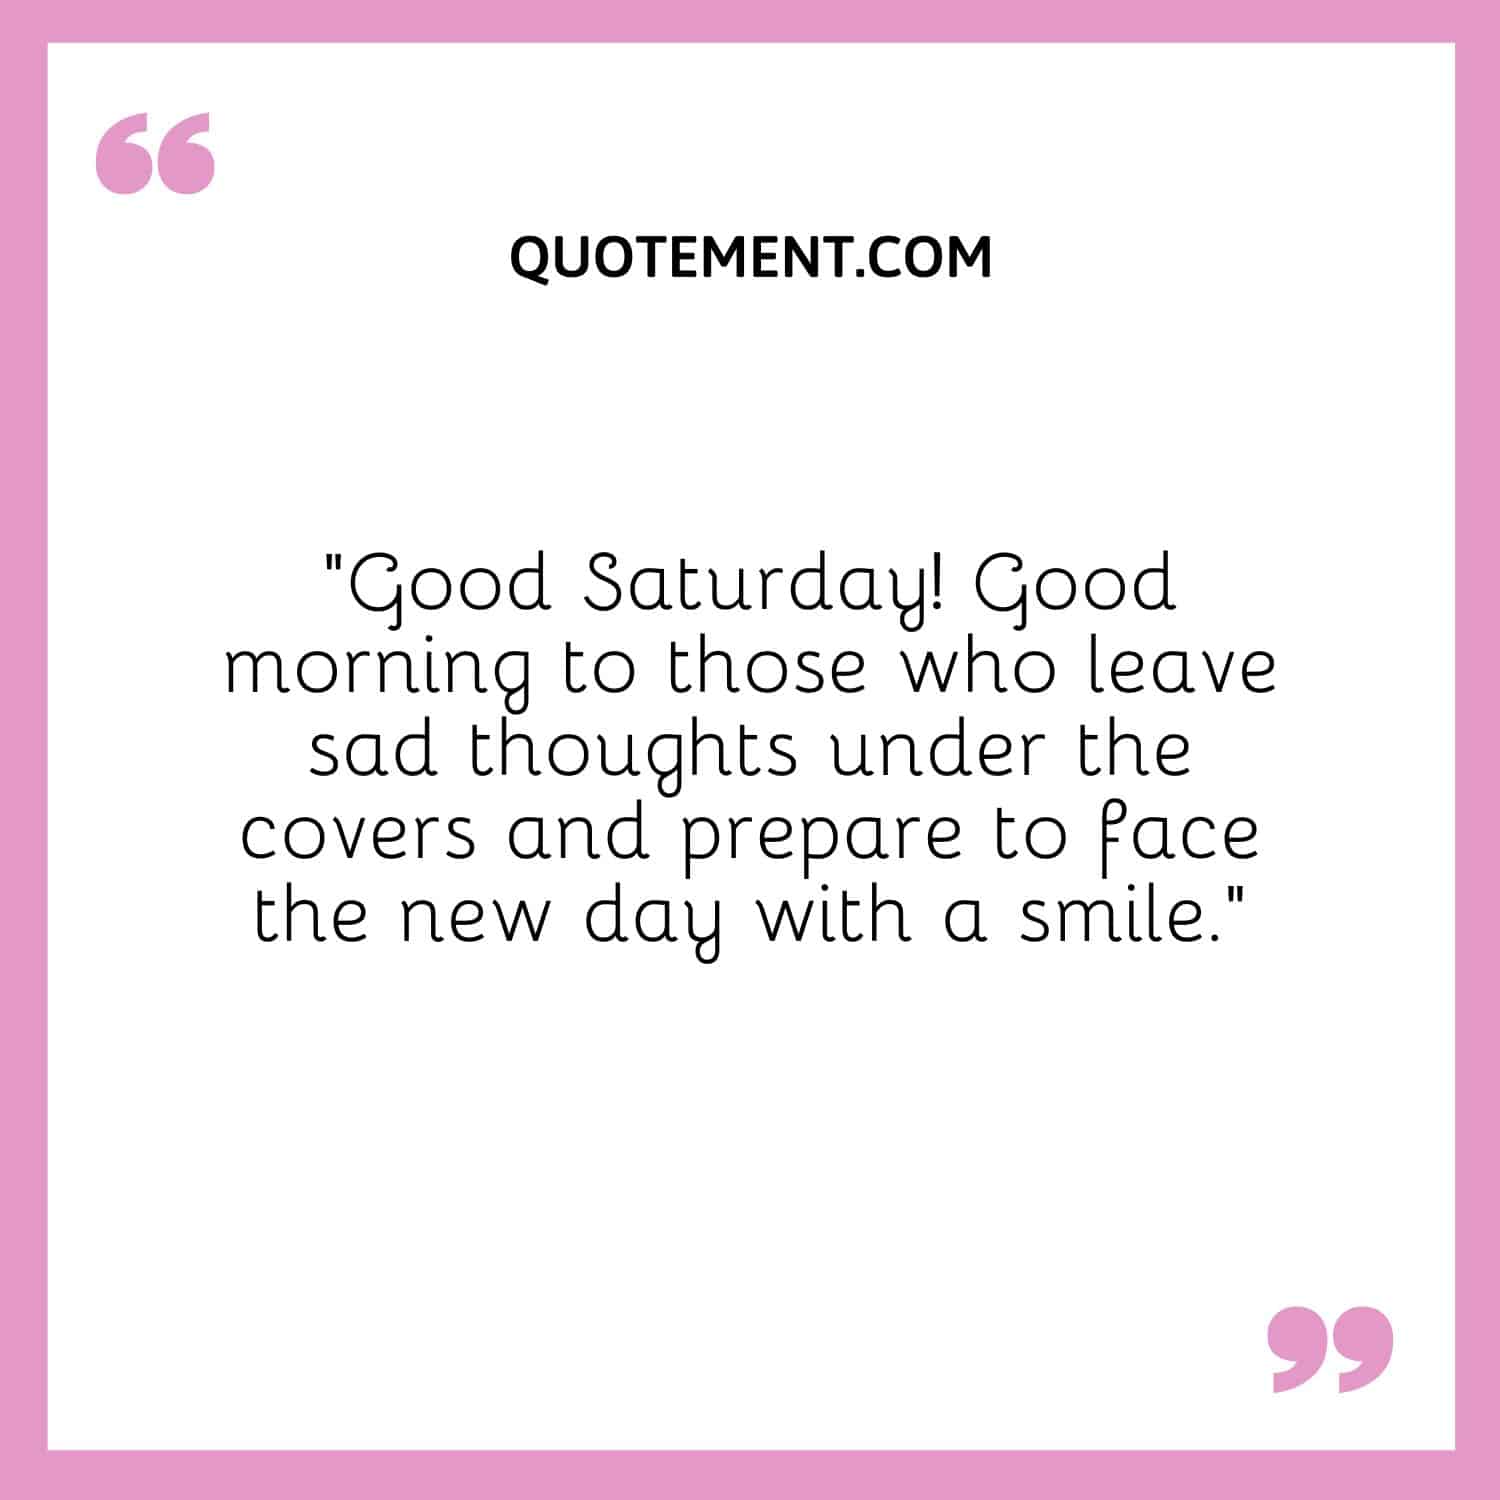 “Good Saturday! Good morning to those who leave sad thoughts under the covers and prepare to face the new day with a smile.”